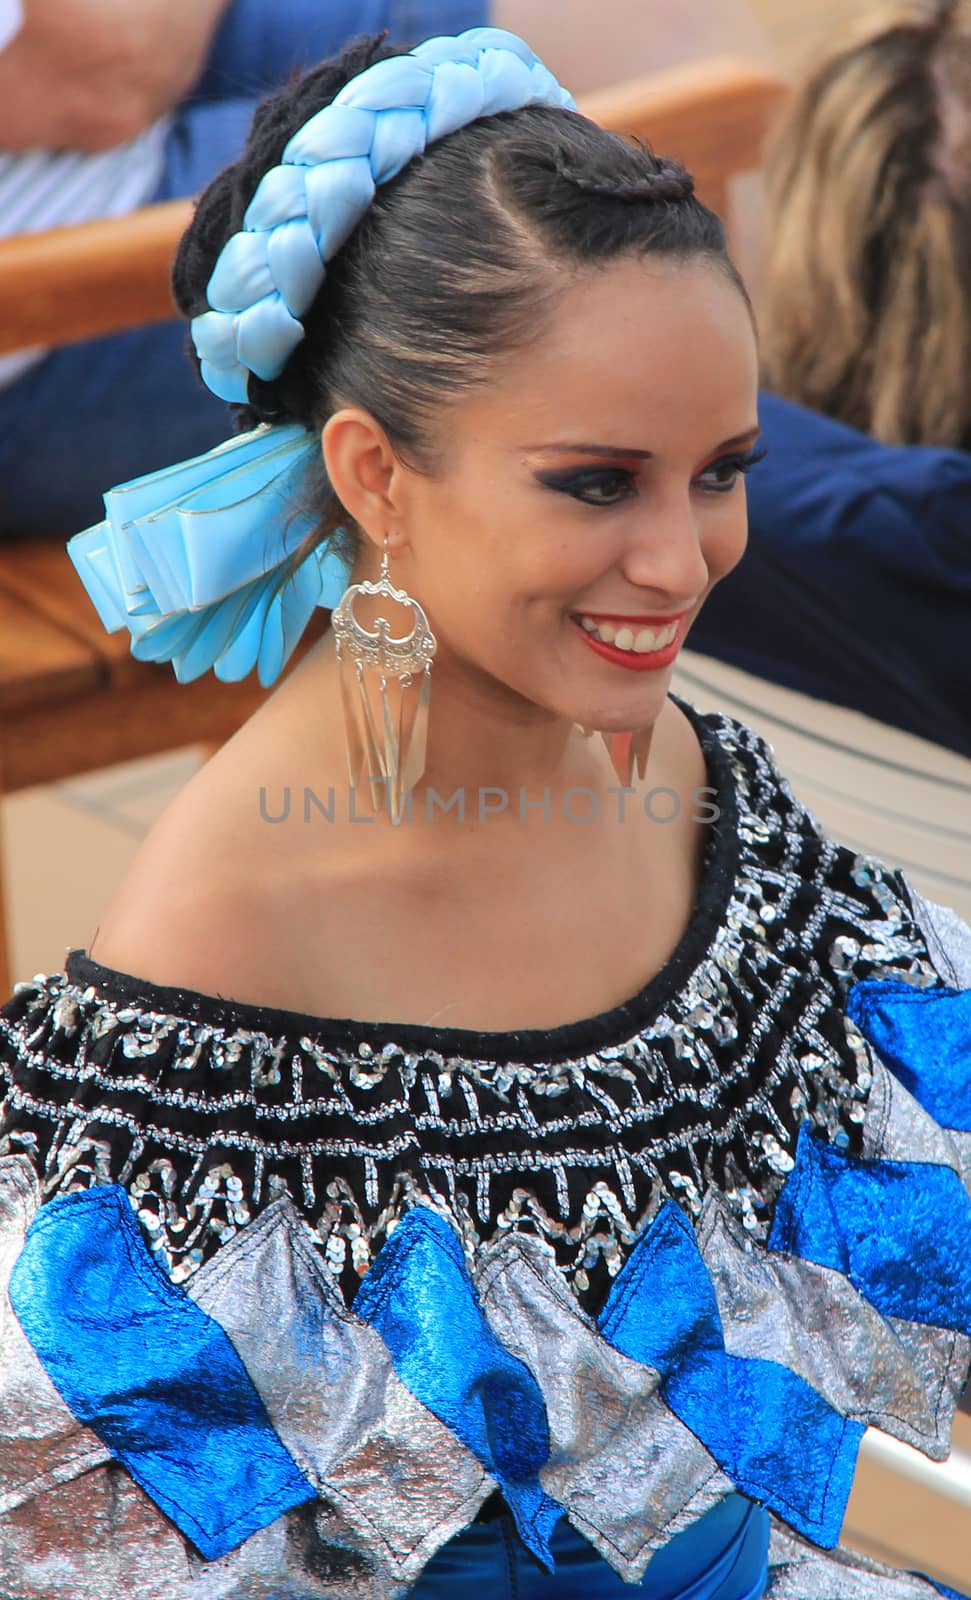 A Mexican entertainer performing on stage in Puerto Vallarta, Mexico
07 Dec 2012
No model release
Editorial only